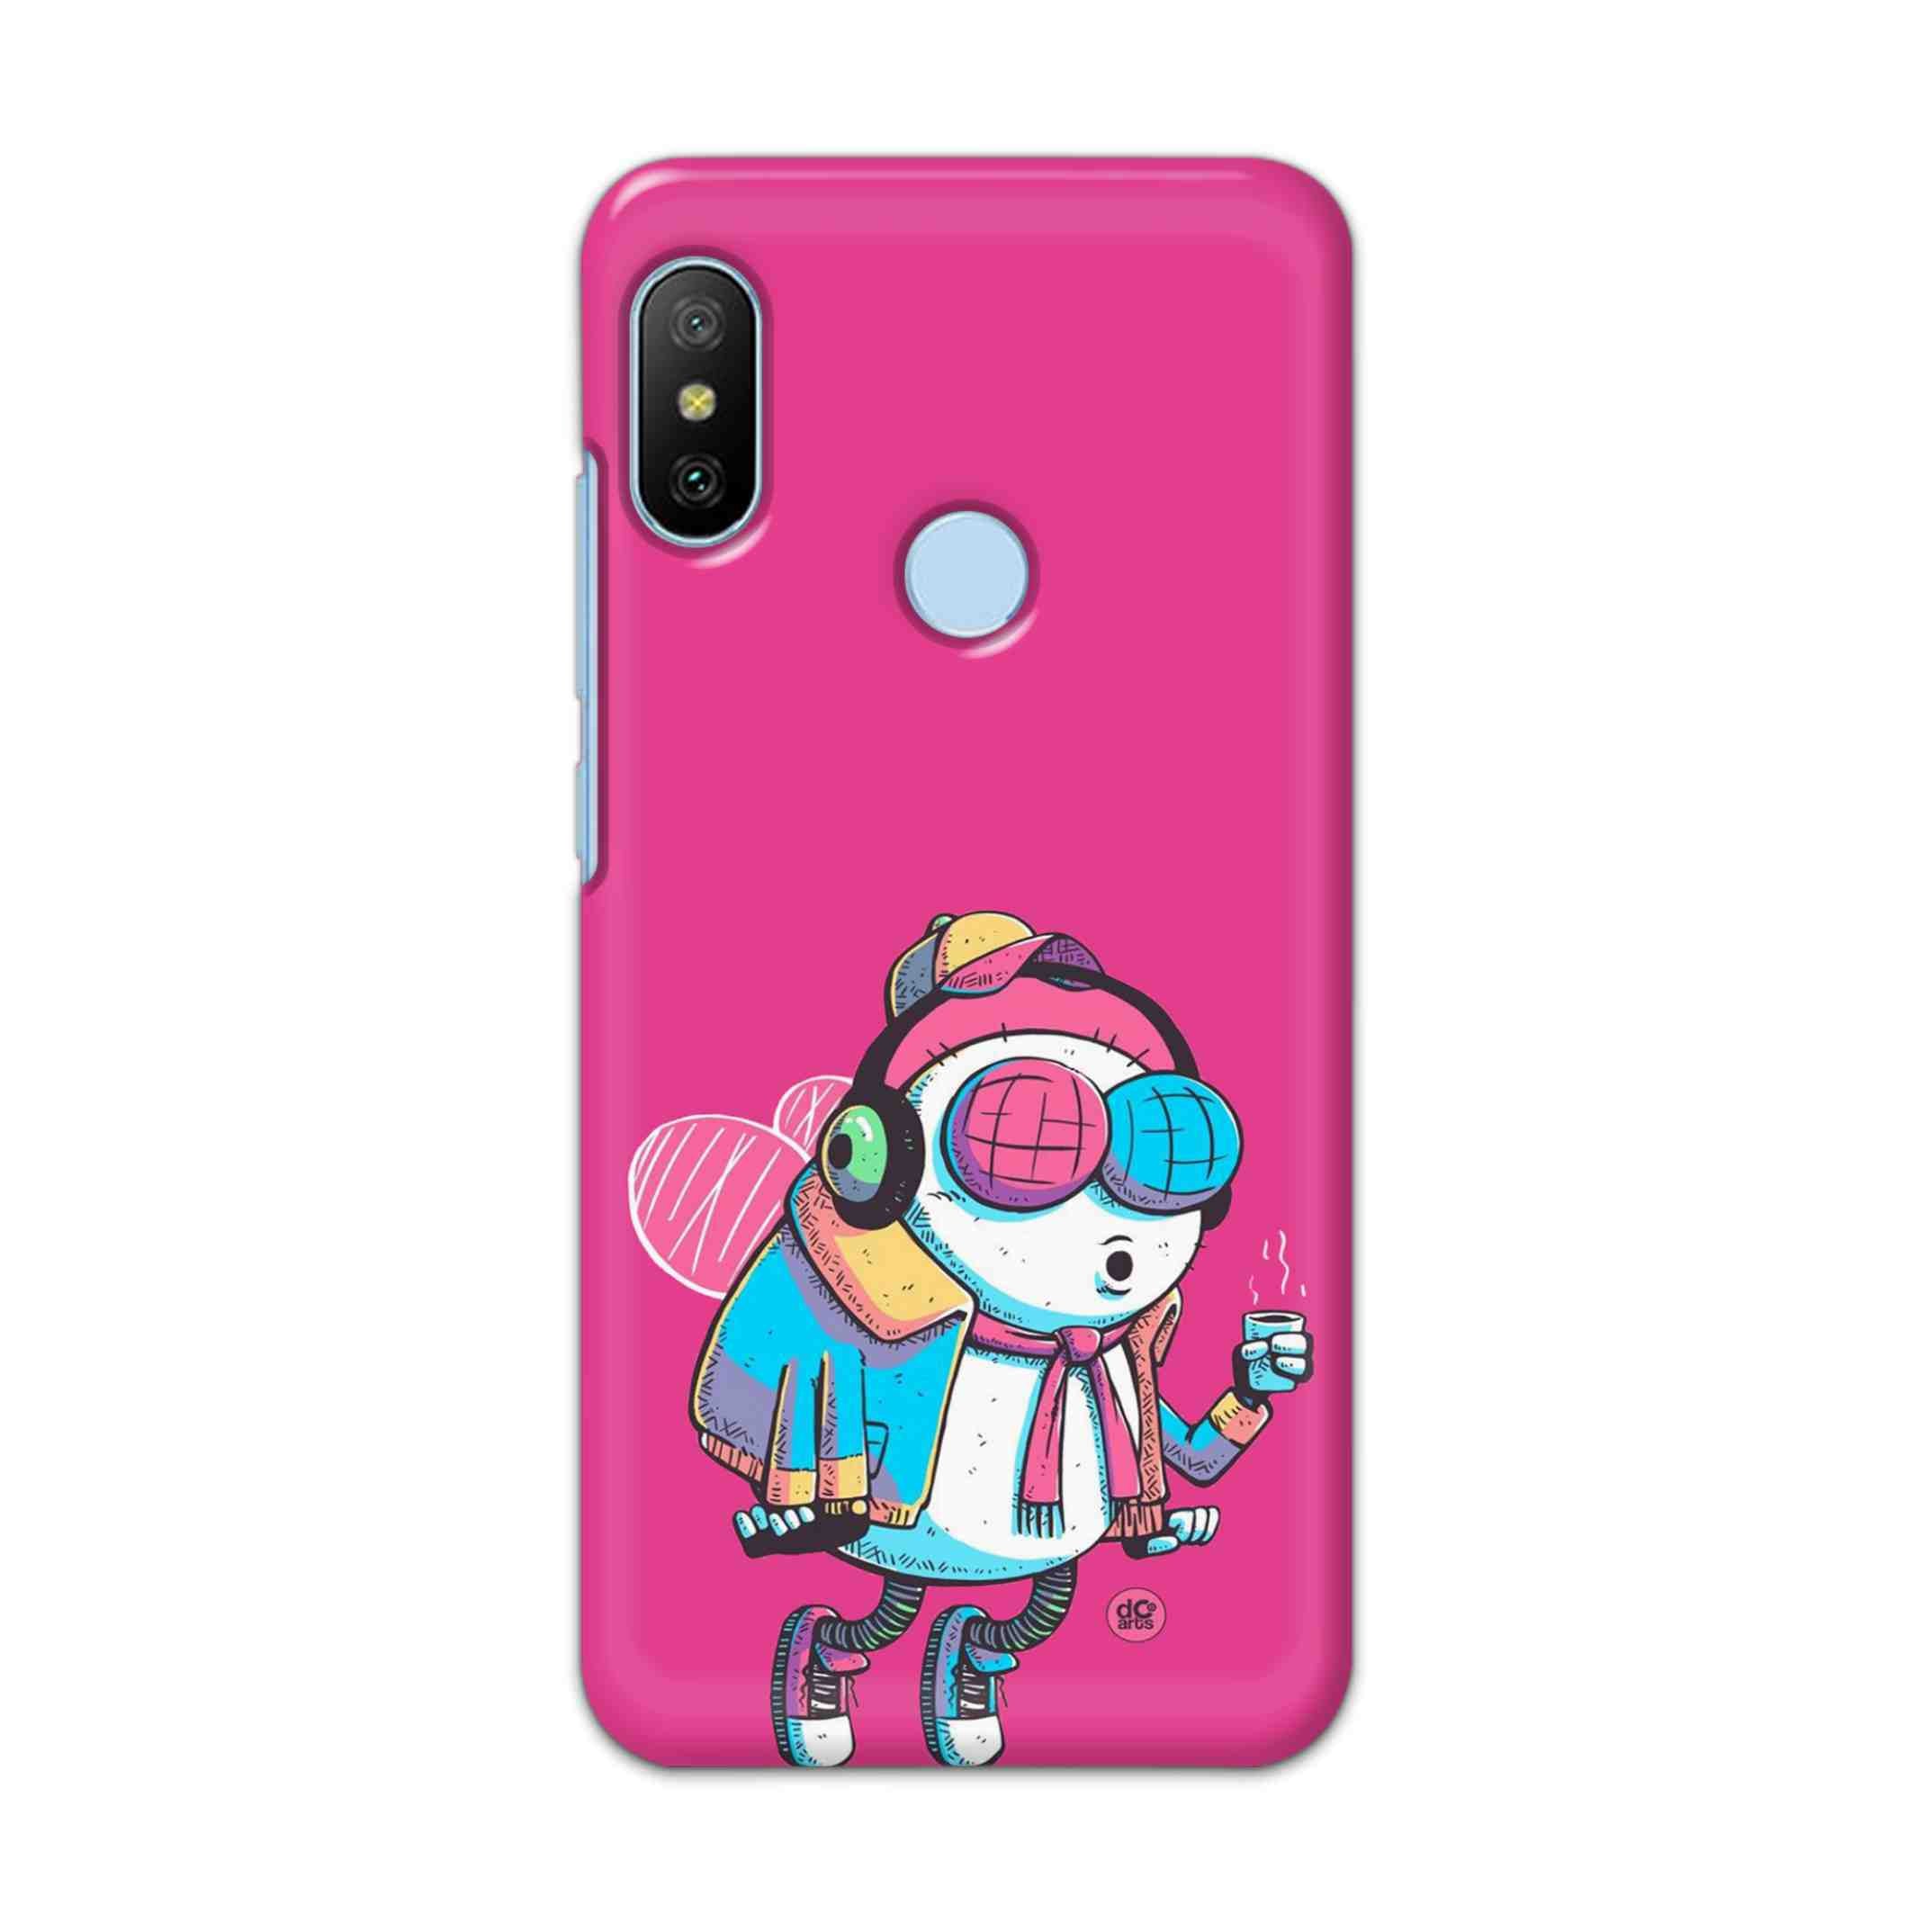 Buy Skyfly Hard Back Mobile Phone Case/Cover For Xiaomi Redmi 6 Pro Online